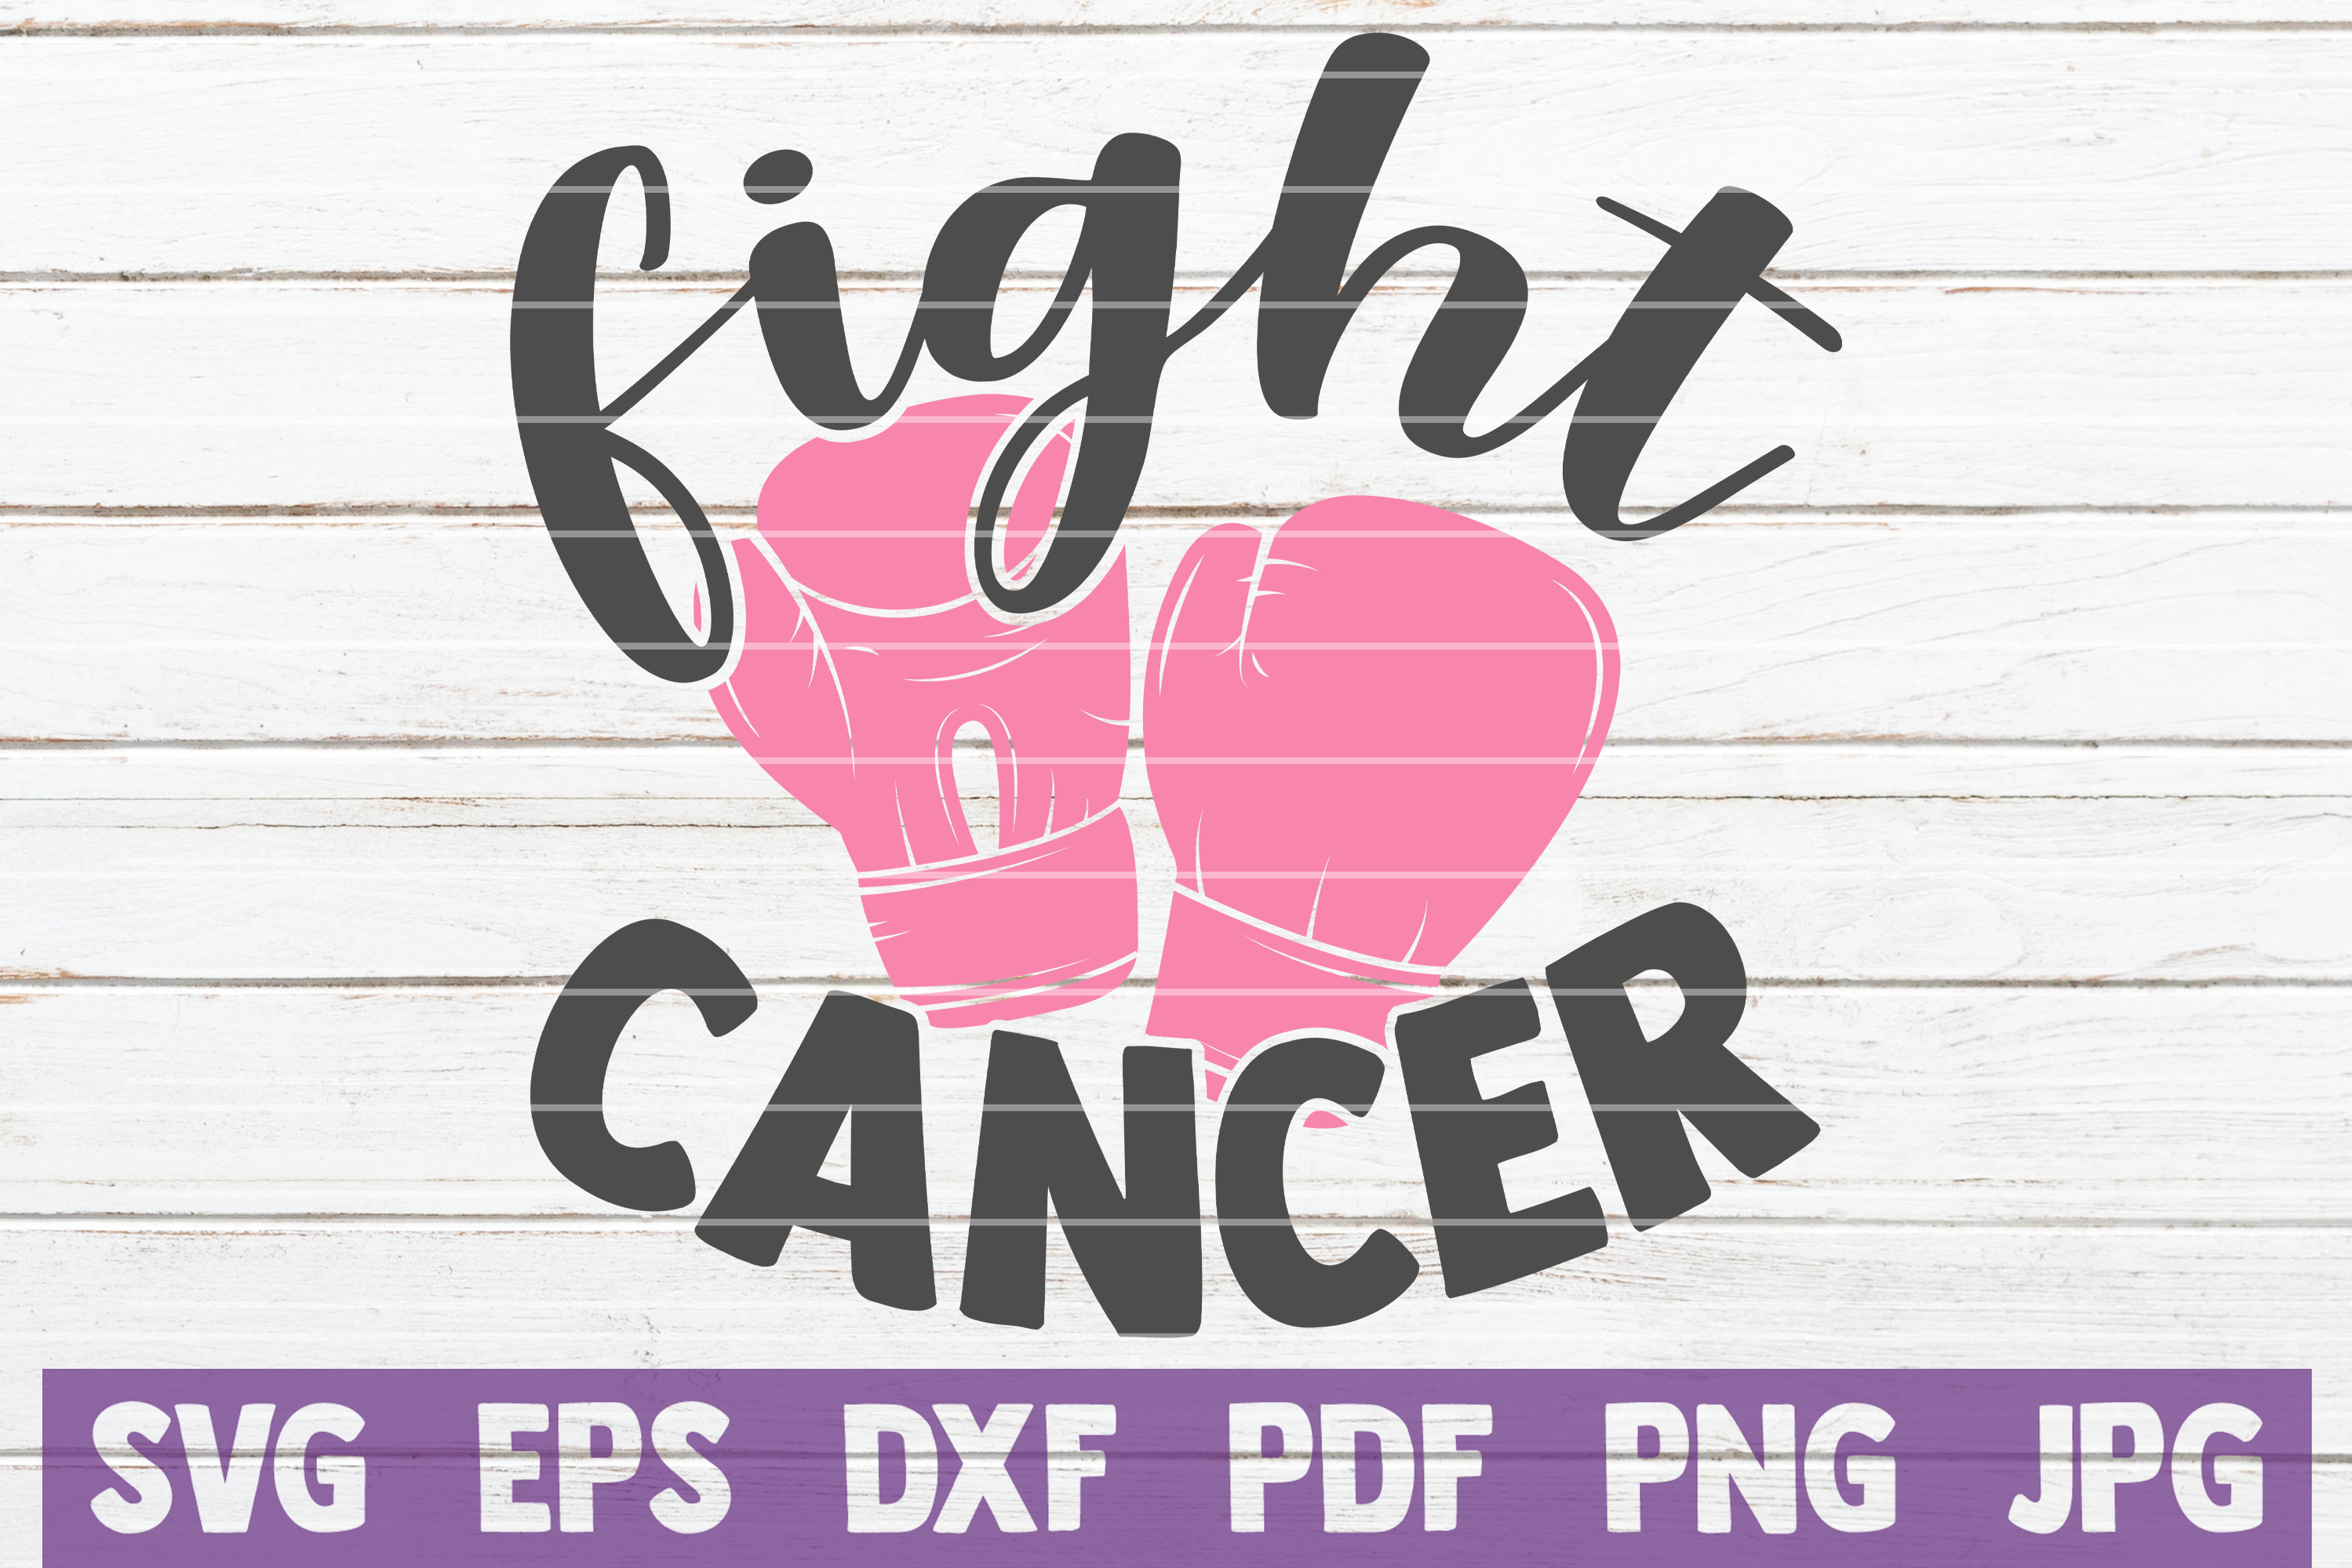 Download Free Fight Cancer Svg Cut File Commercial Use 266289 Cut Files SVG DXF Cut File